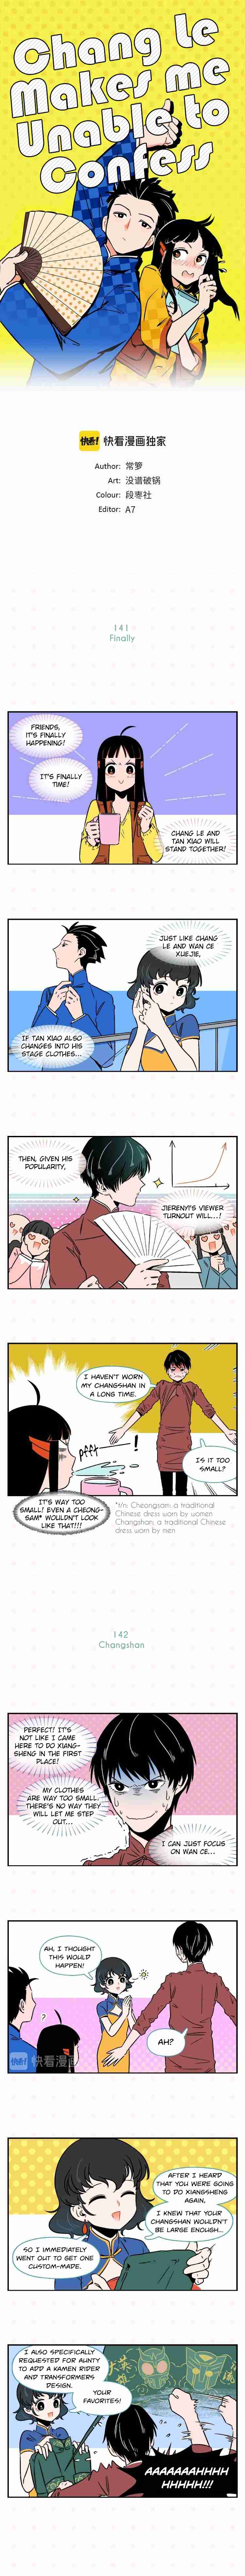 Chang Le Makes Me Unable to Confess Ch. 15 He Likes Me!